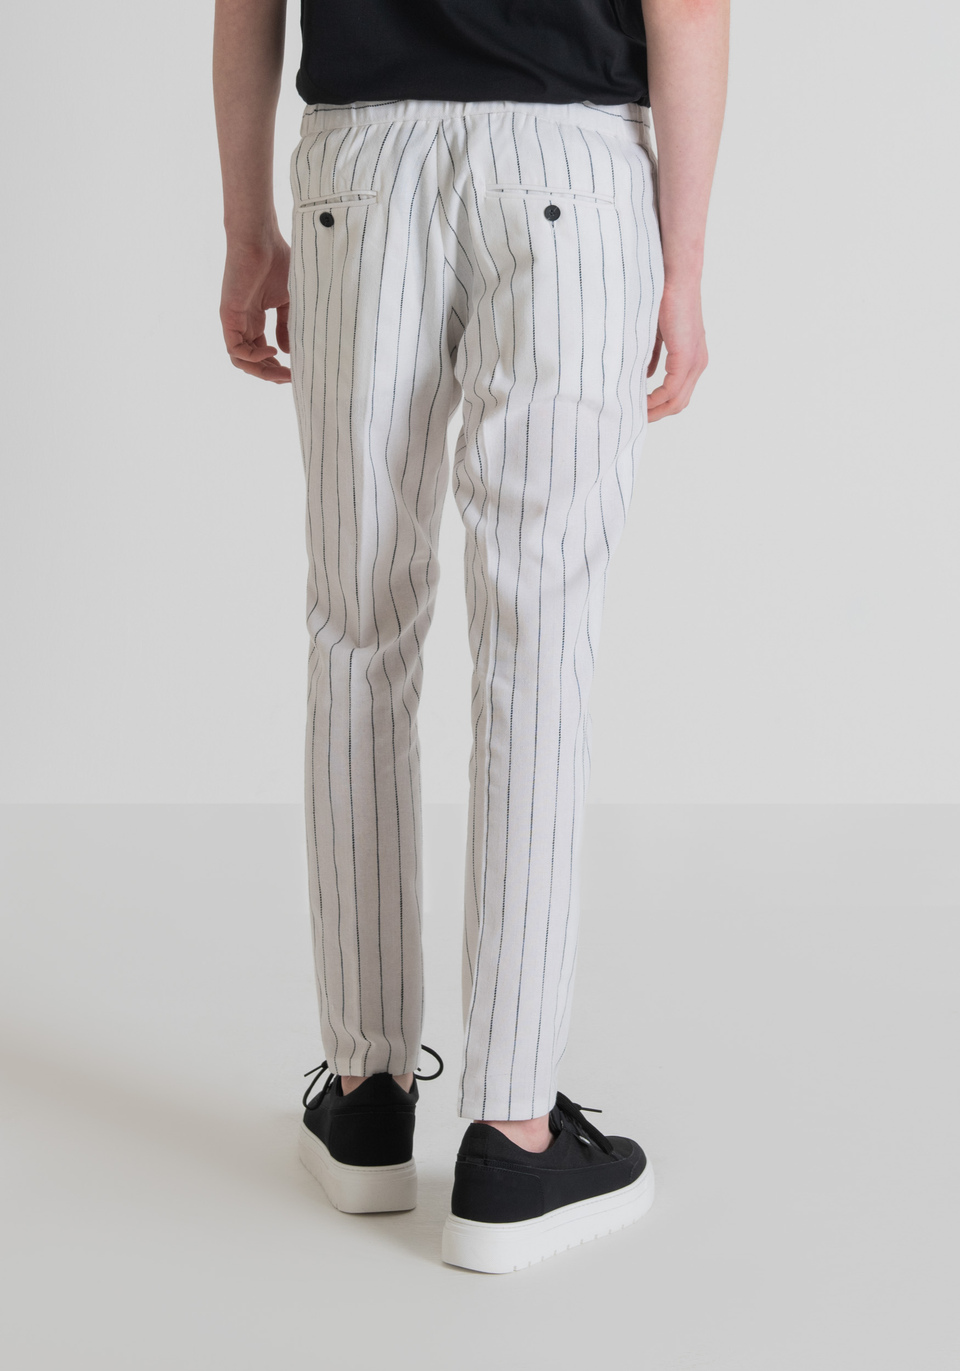 SLIM-FIT “JOE” TROUSERS IN A COTTON-AND-LINEN BLEND WITH AN ADJUSTABLE DRAWSTRING - Antony Morato Online Shop